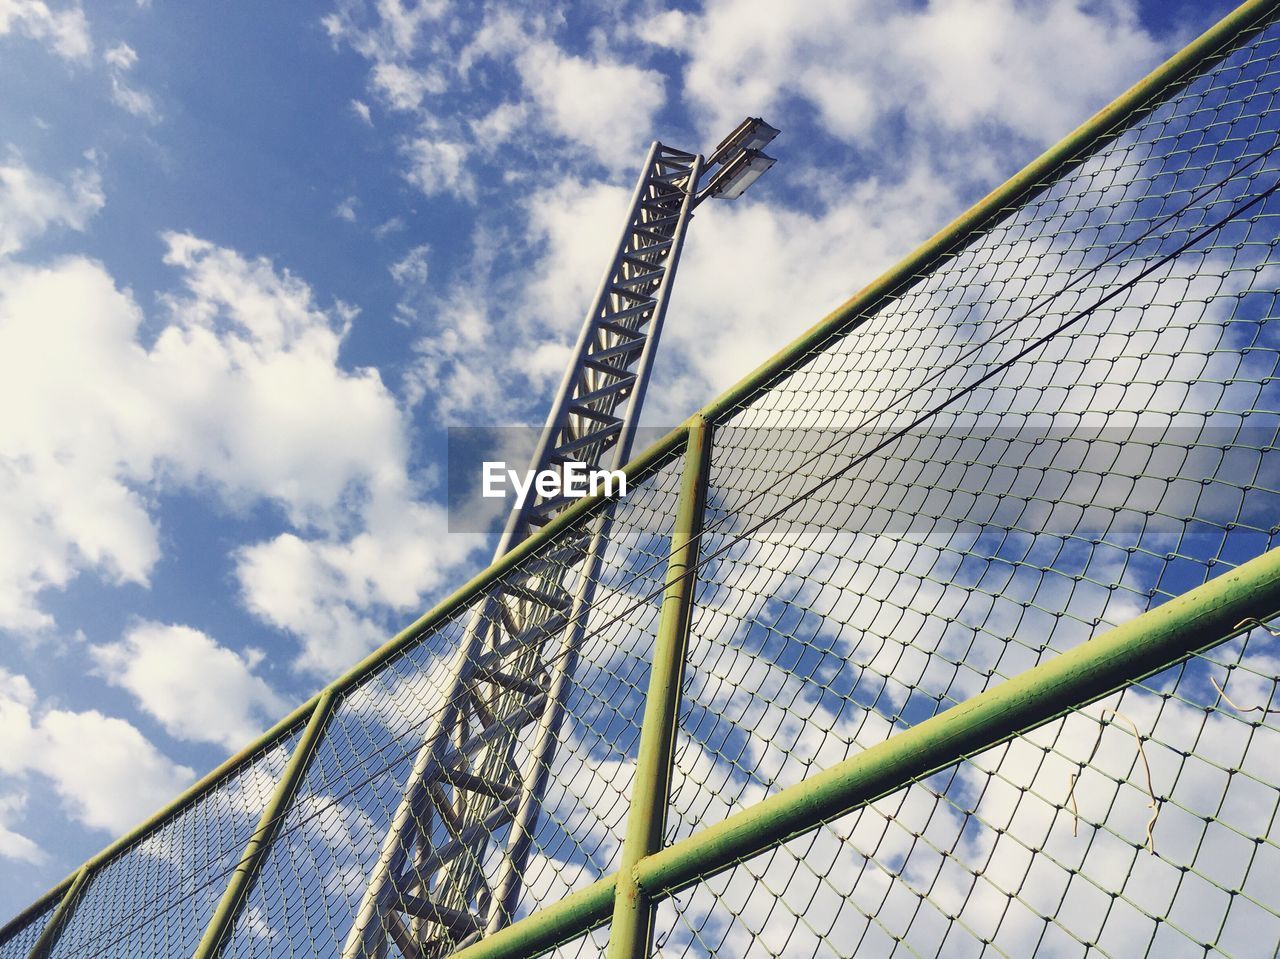 Low angle view of floodlight and chainlink fence against sky